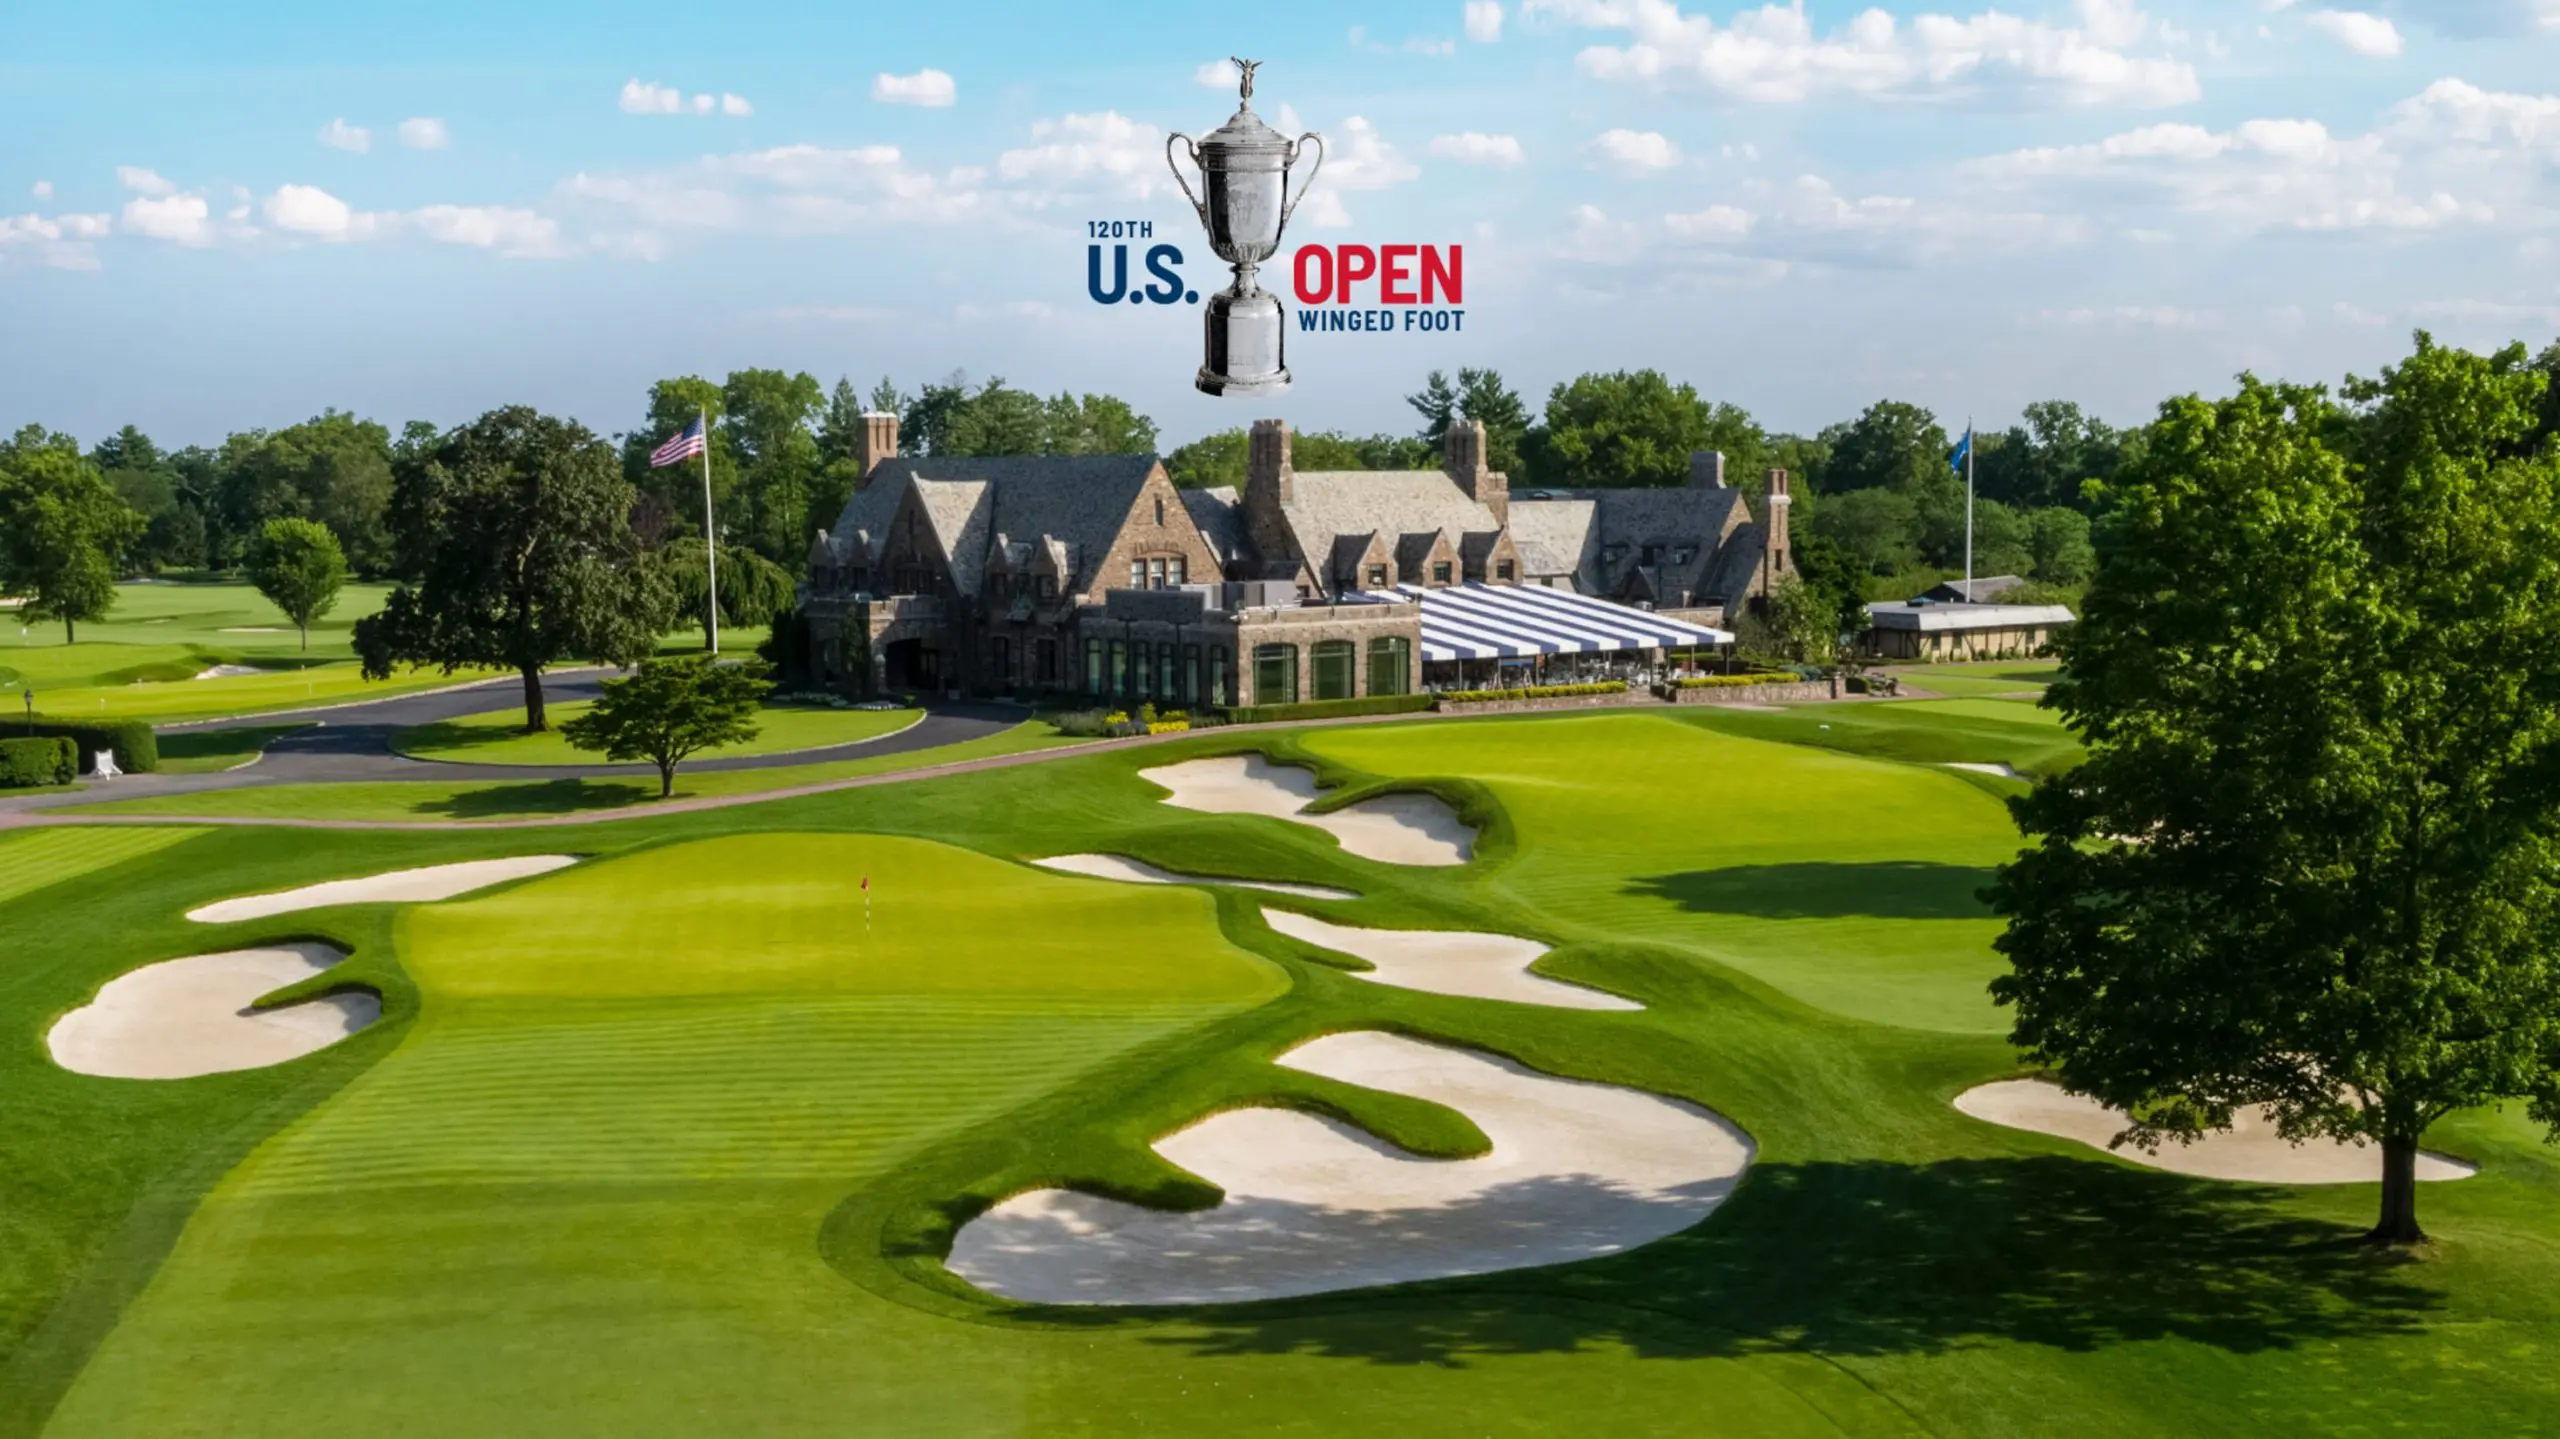 Top favorites of winning the Golf US Open 2020 The Union Journal